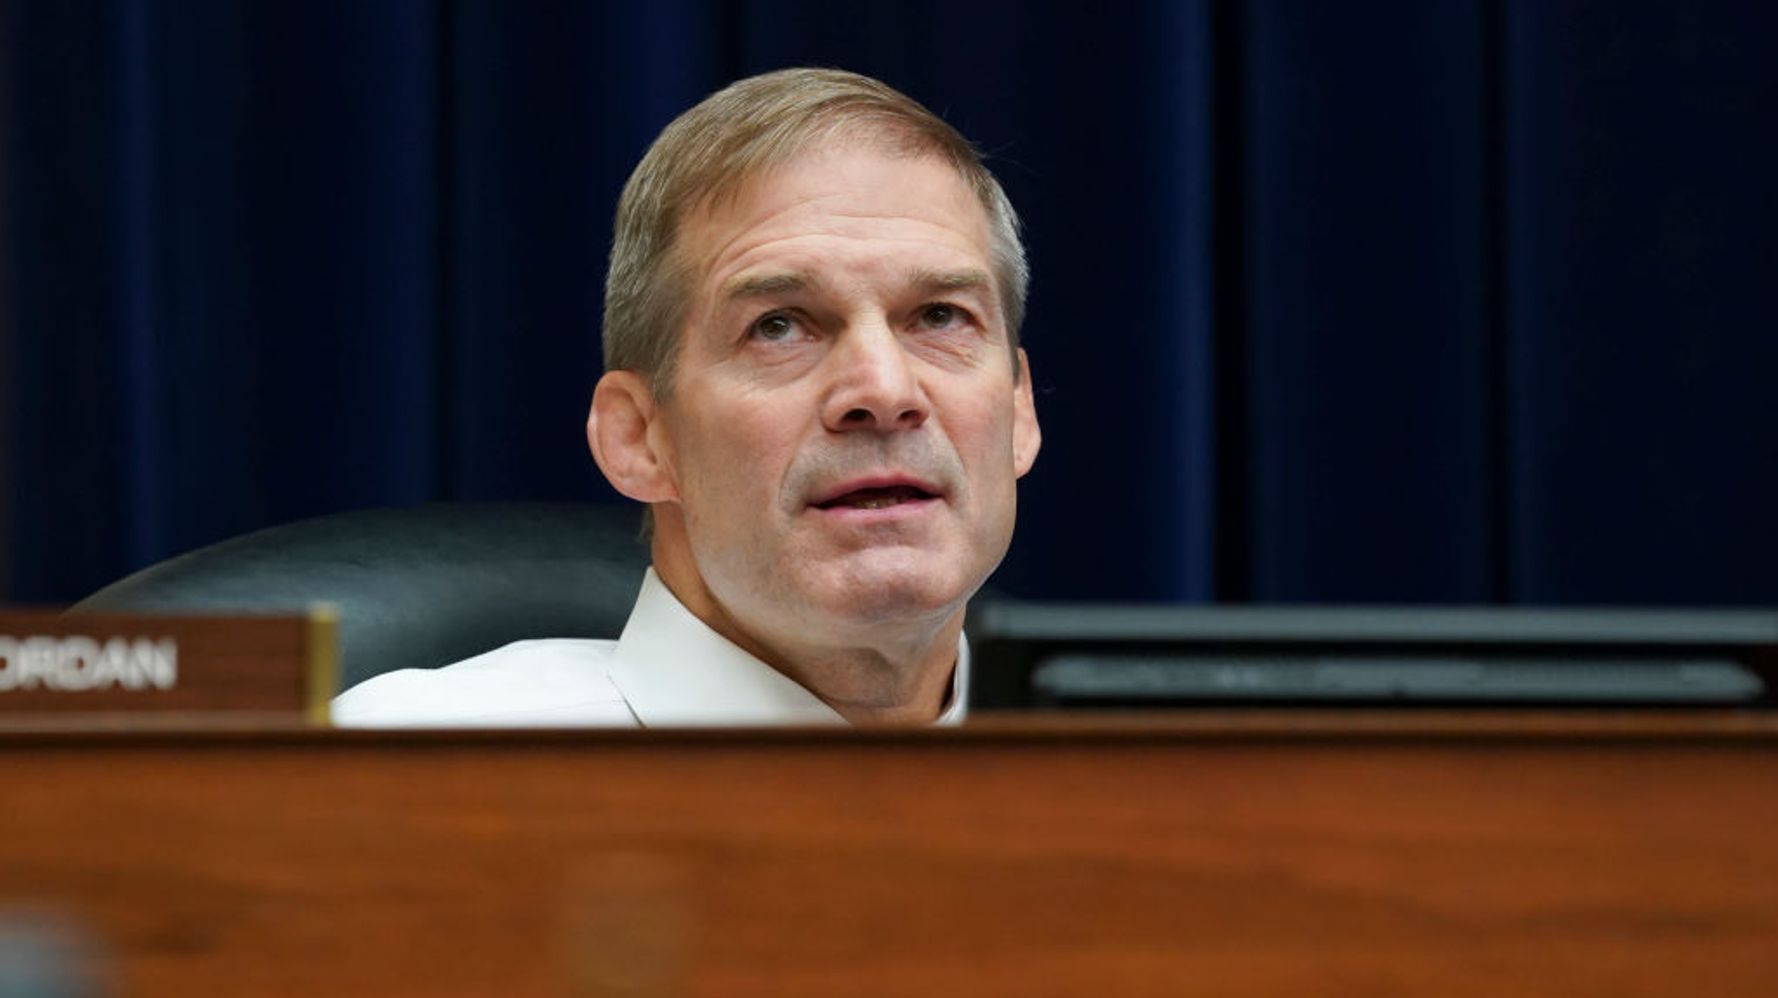 George Clooney to produce focus areas on athlete sex abuse where Jim Jordan coached